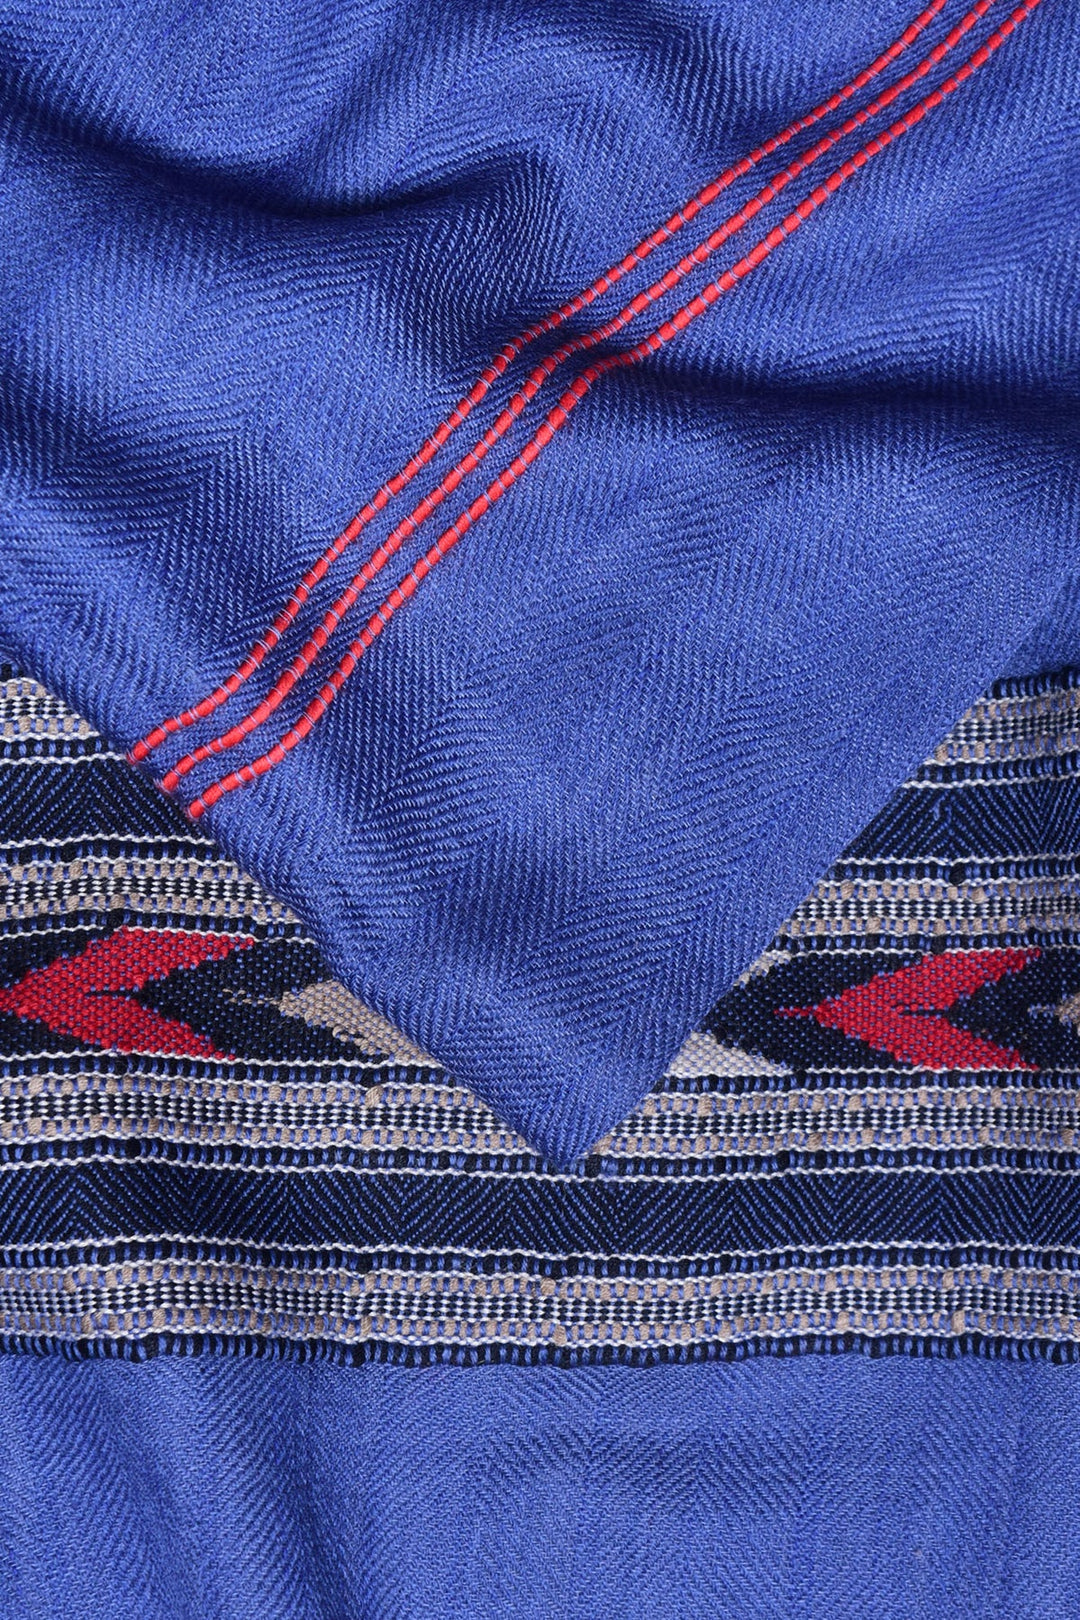 Blue Cashmere Stole with Hand Embroidery | Sisko Handwoven Soft Cashmere Stole - Blue